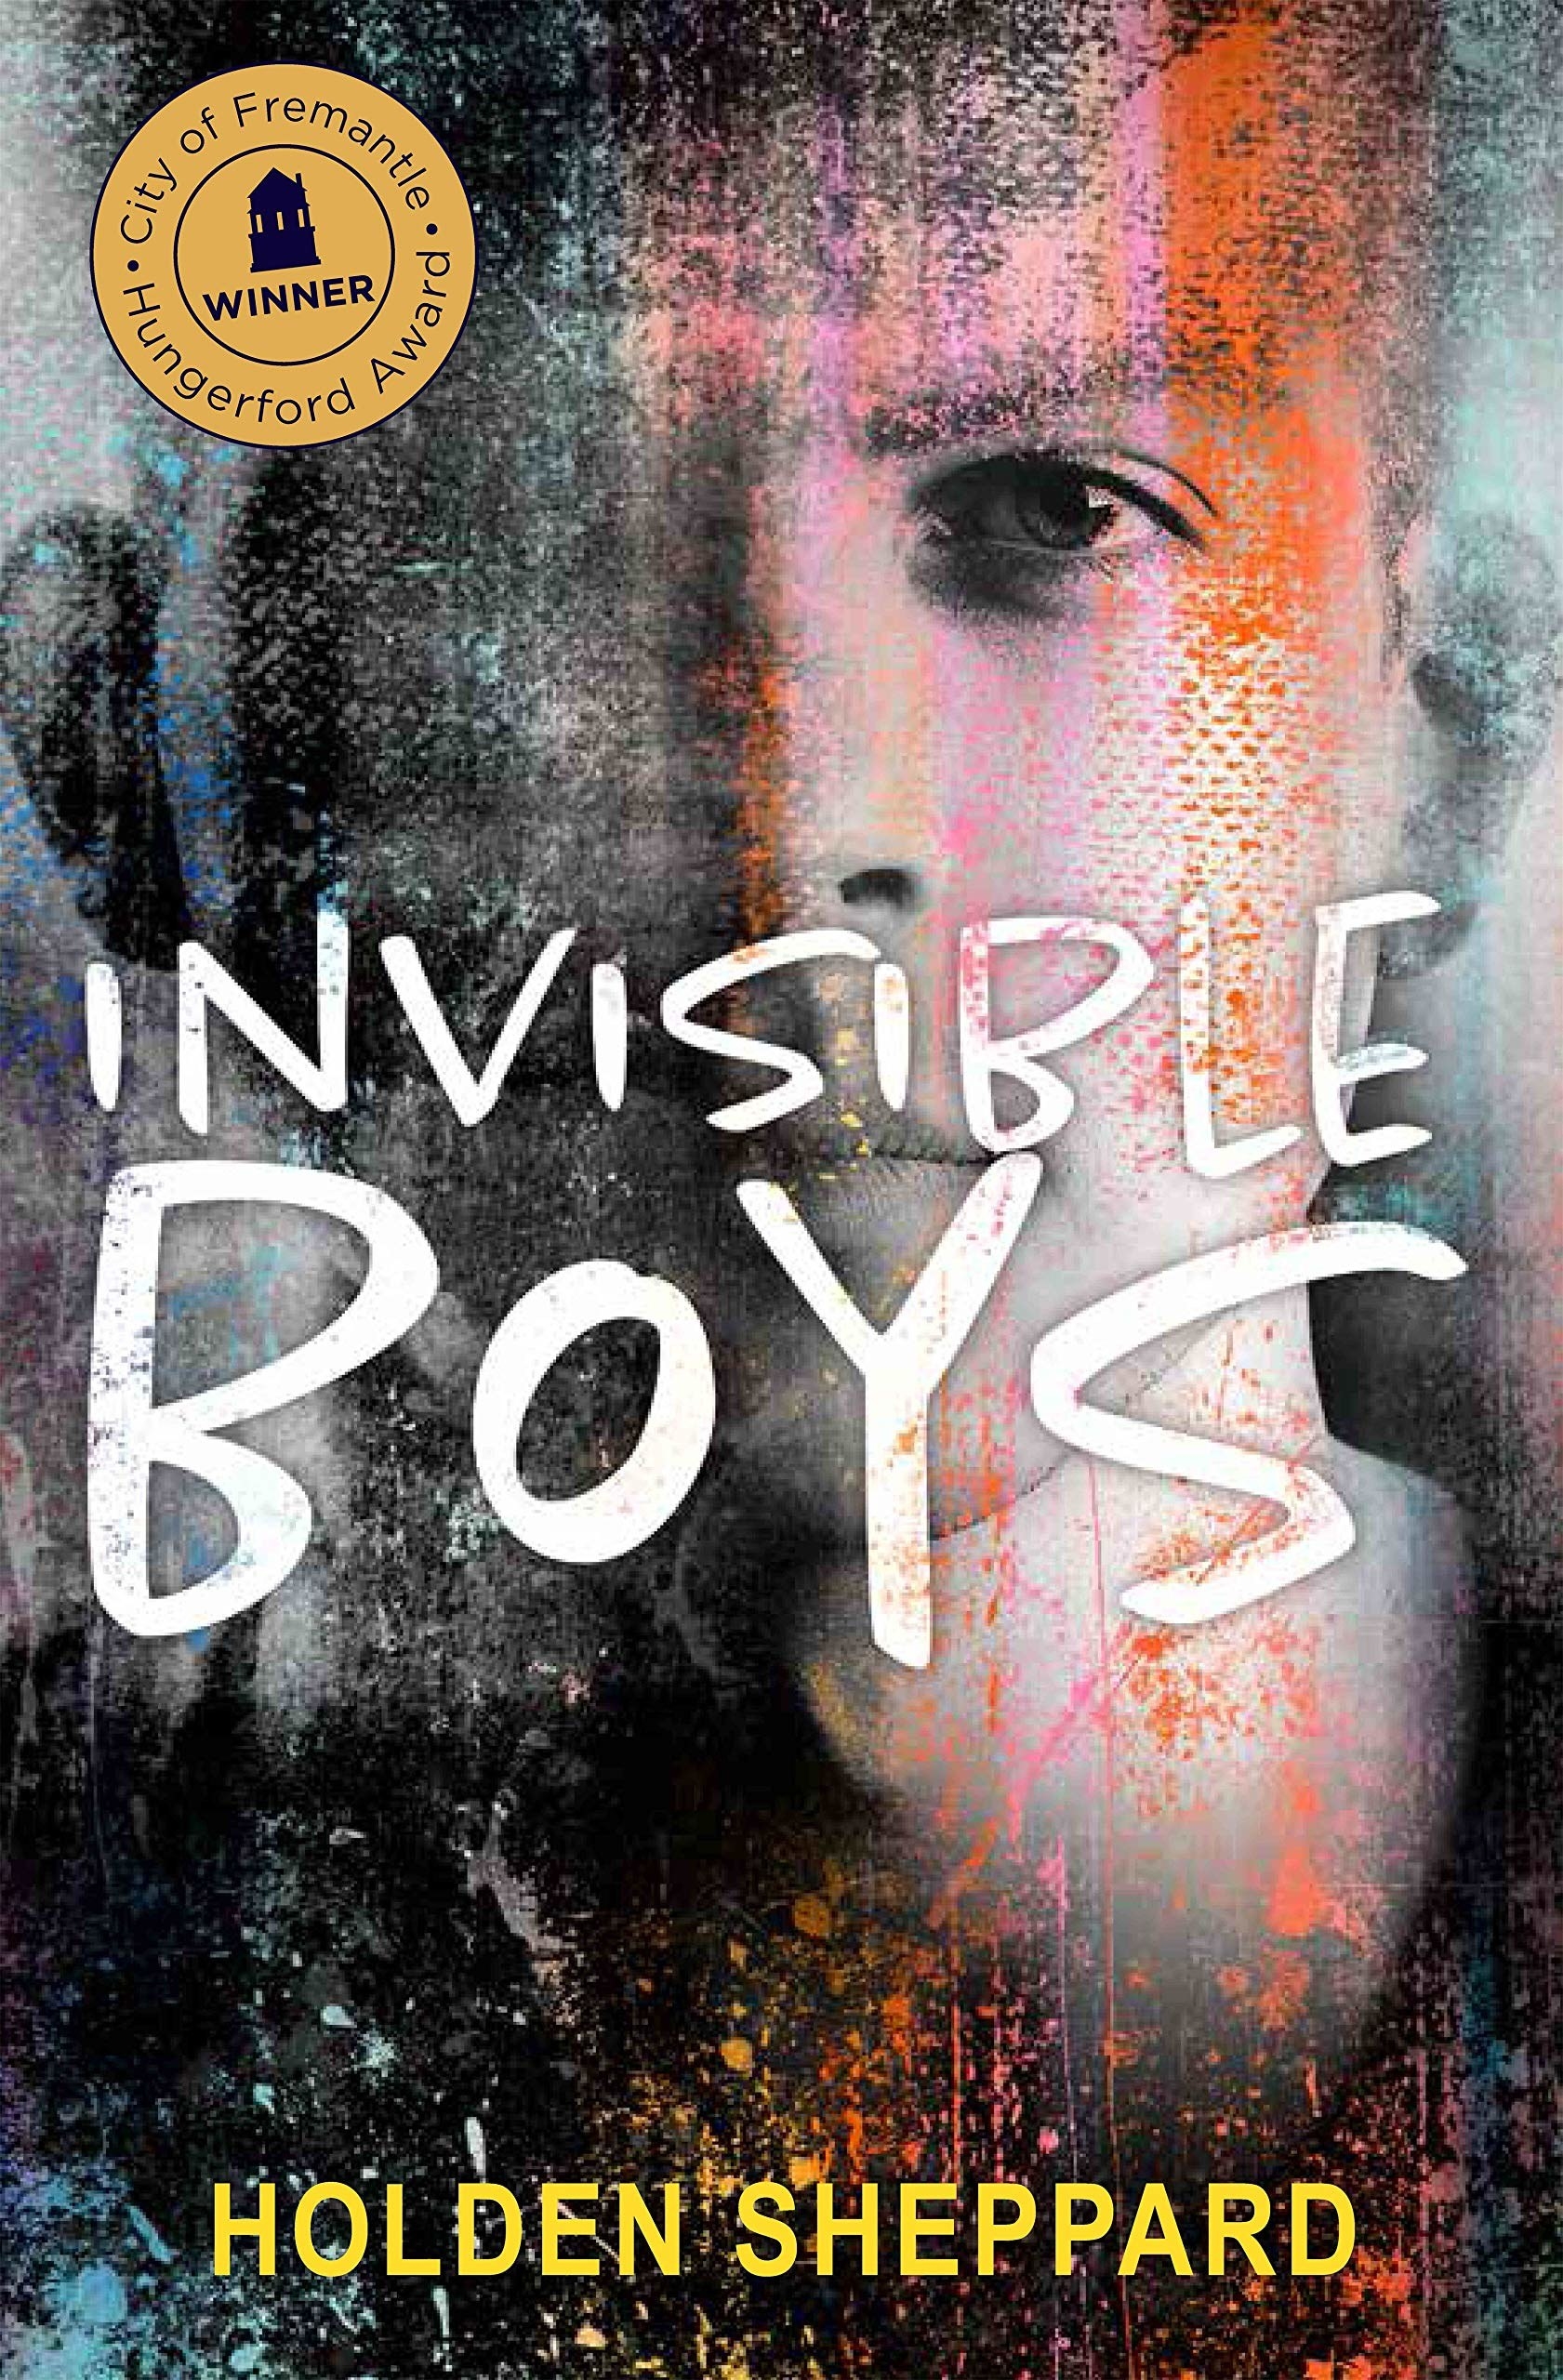 Book cover of &quot;Invisible boys&quot;